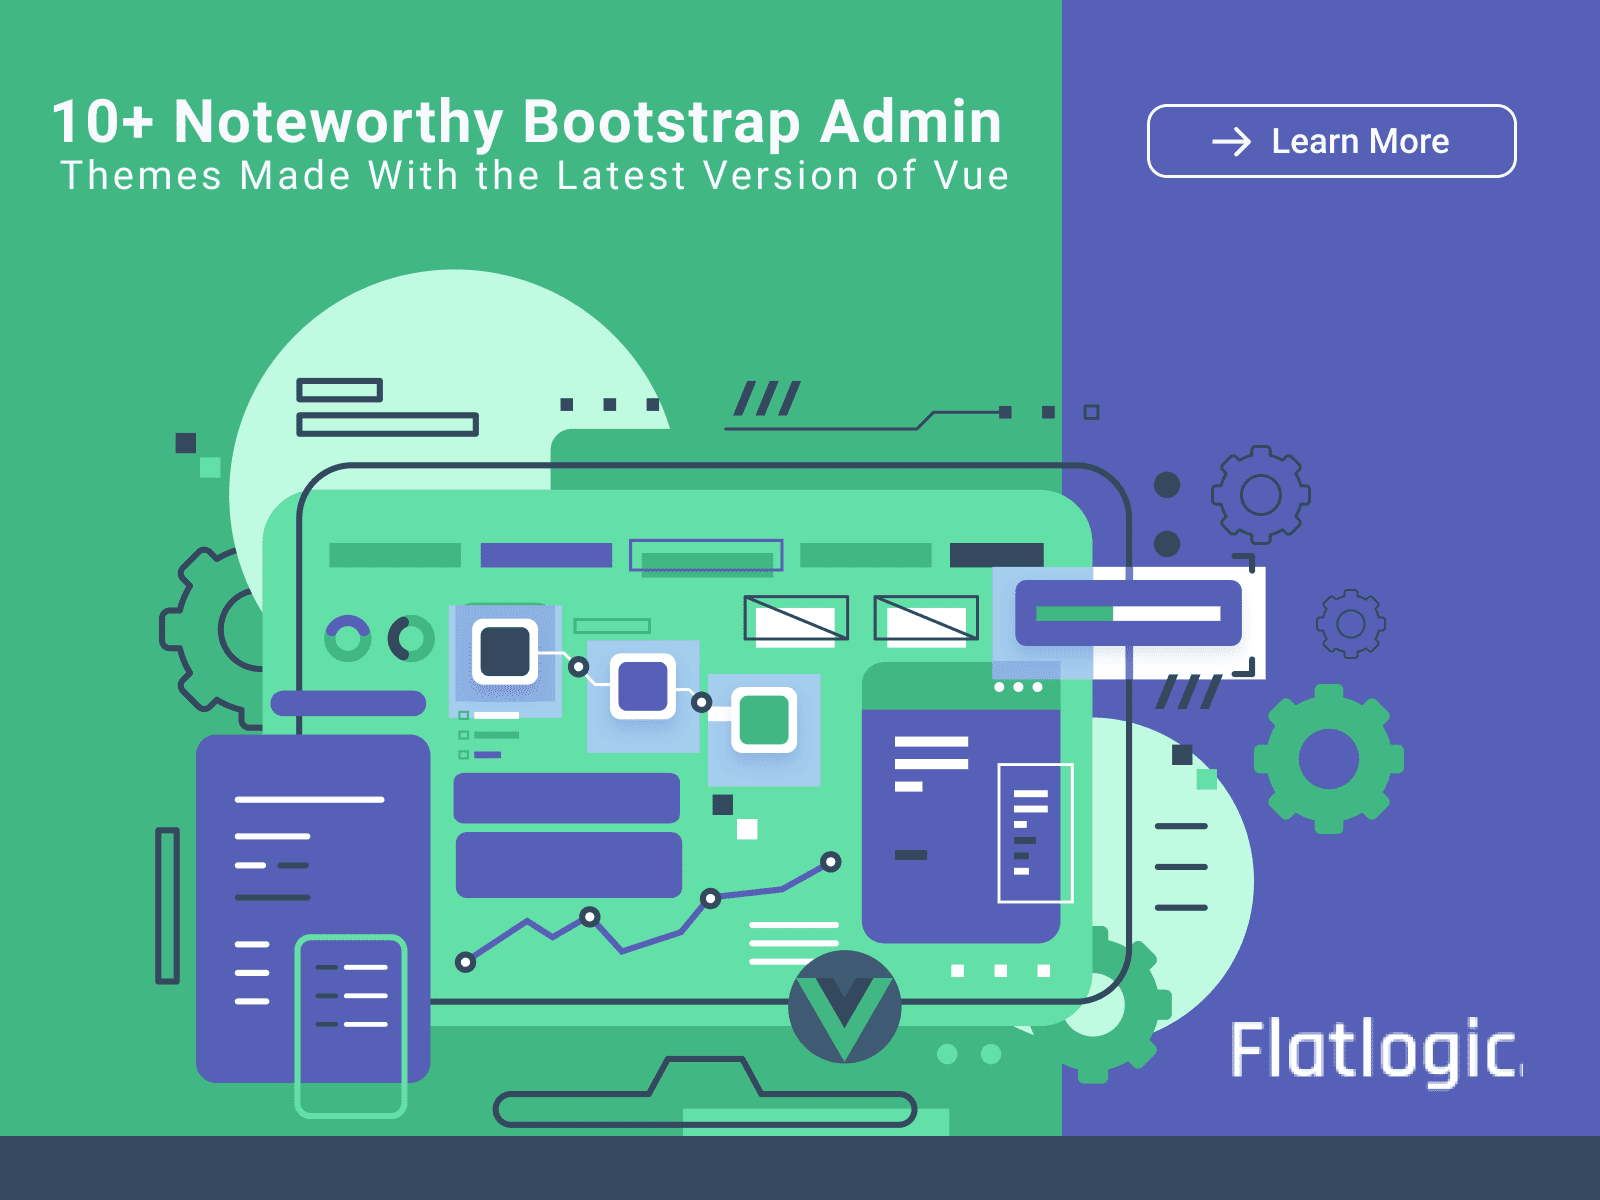 10+ Noteworthy Bootstrap Admin Themes Made With the Latest Version of Vue